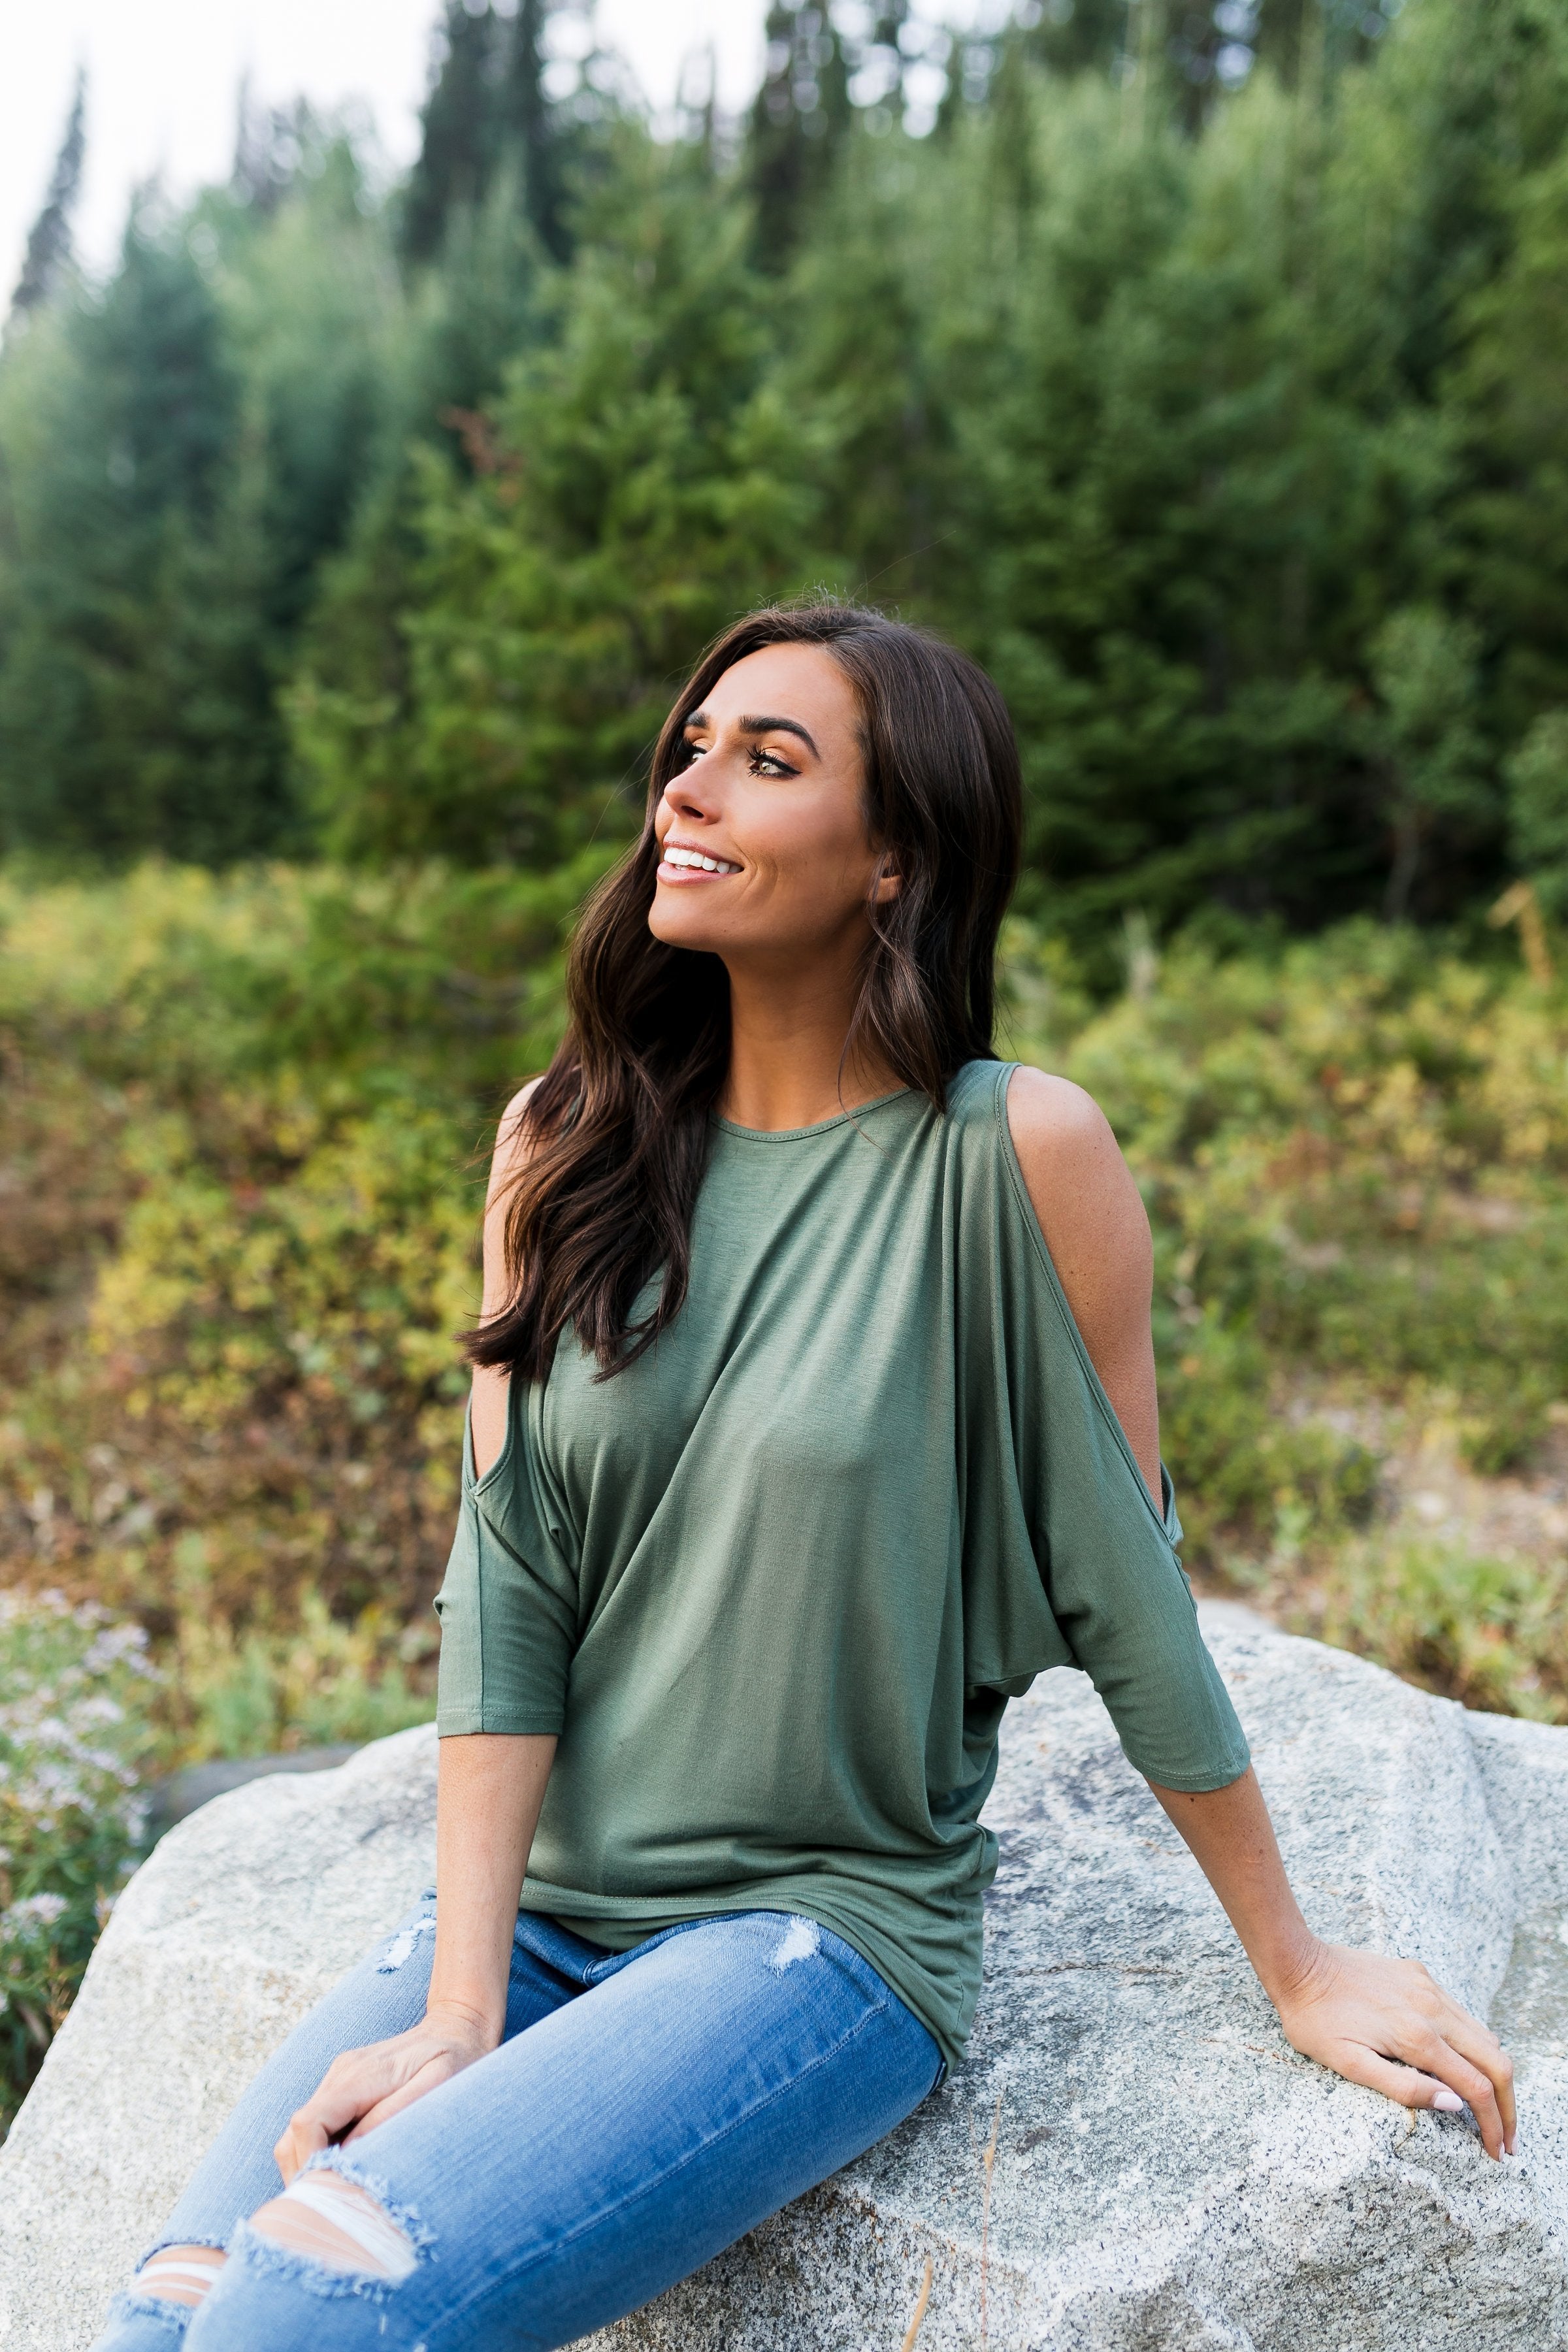 Cold Shoulders Warm Heart Top in Olive - ALL SALES FINAL